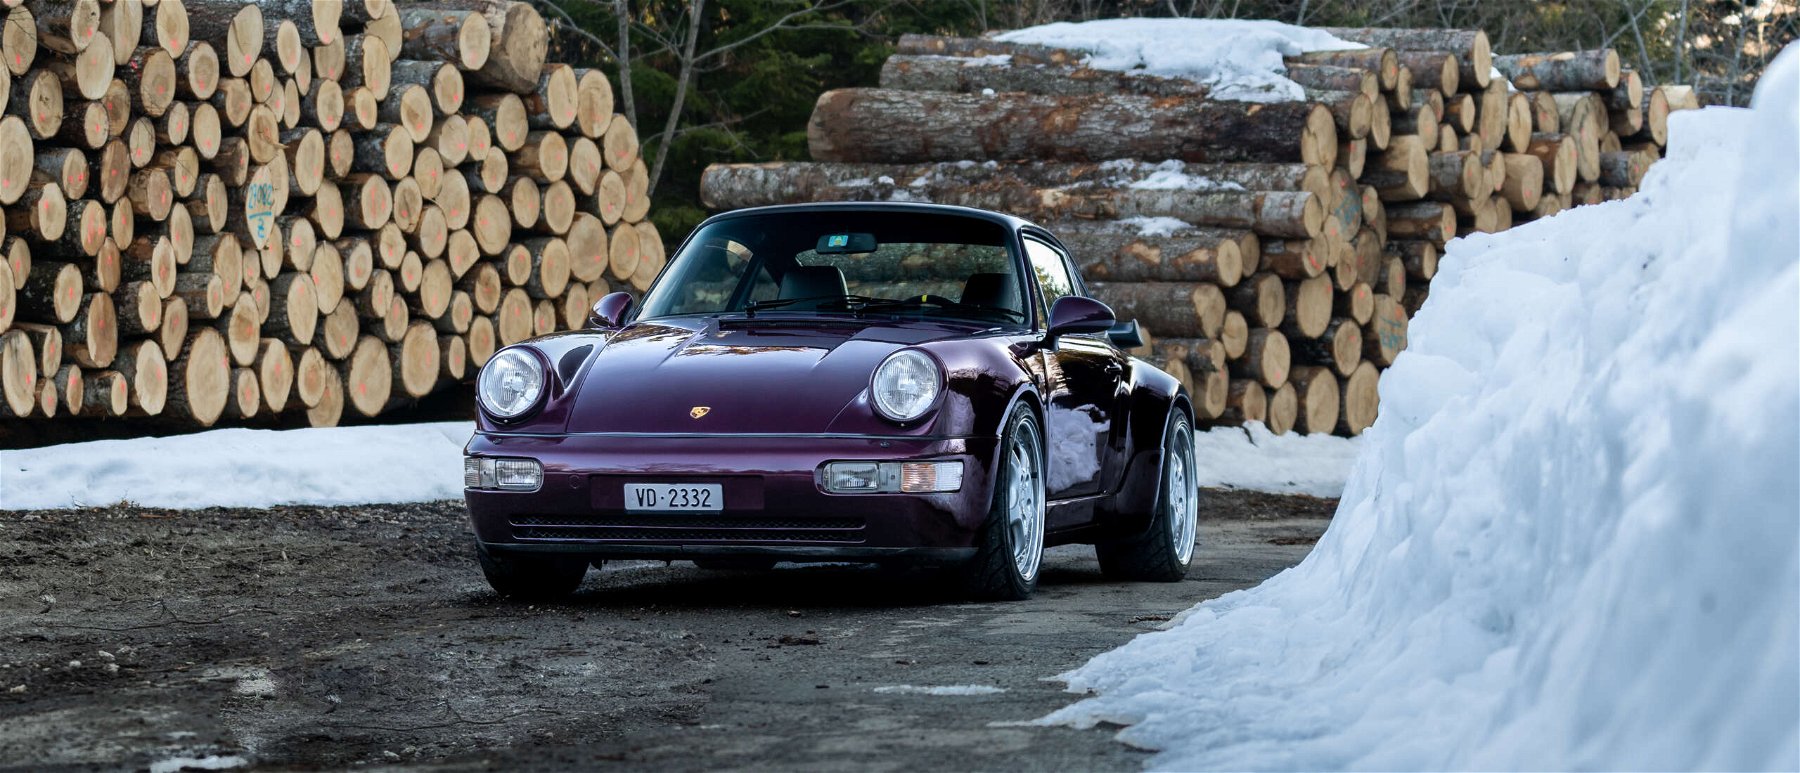 Car passion is inheritable. Maxime and his Porsche love.